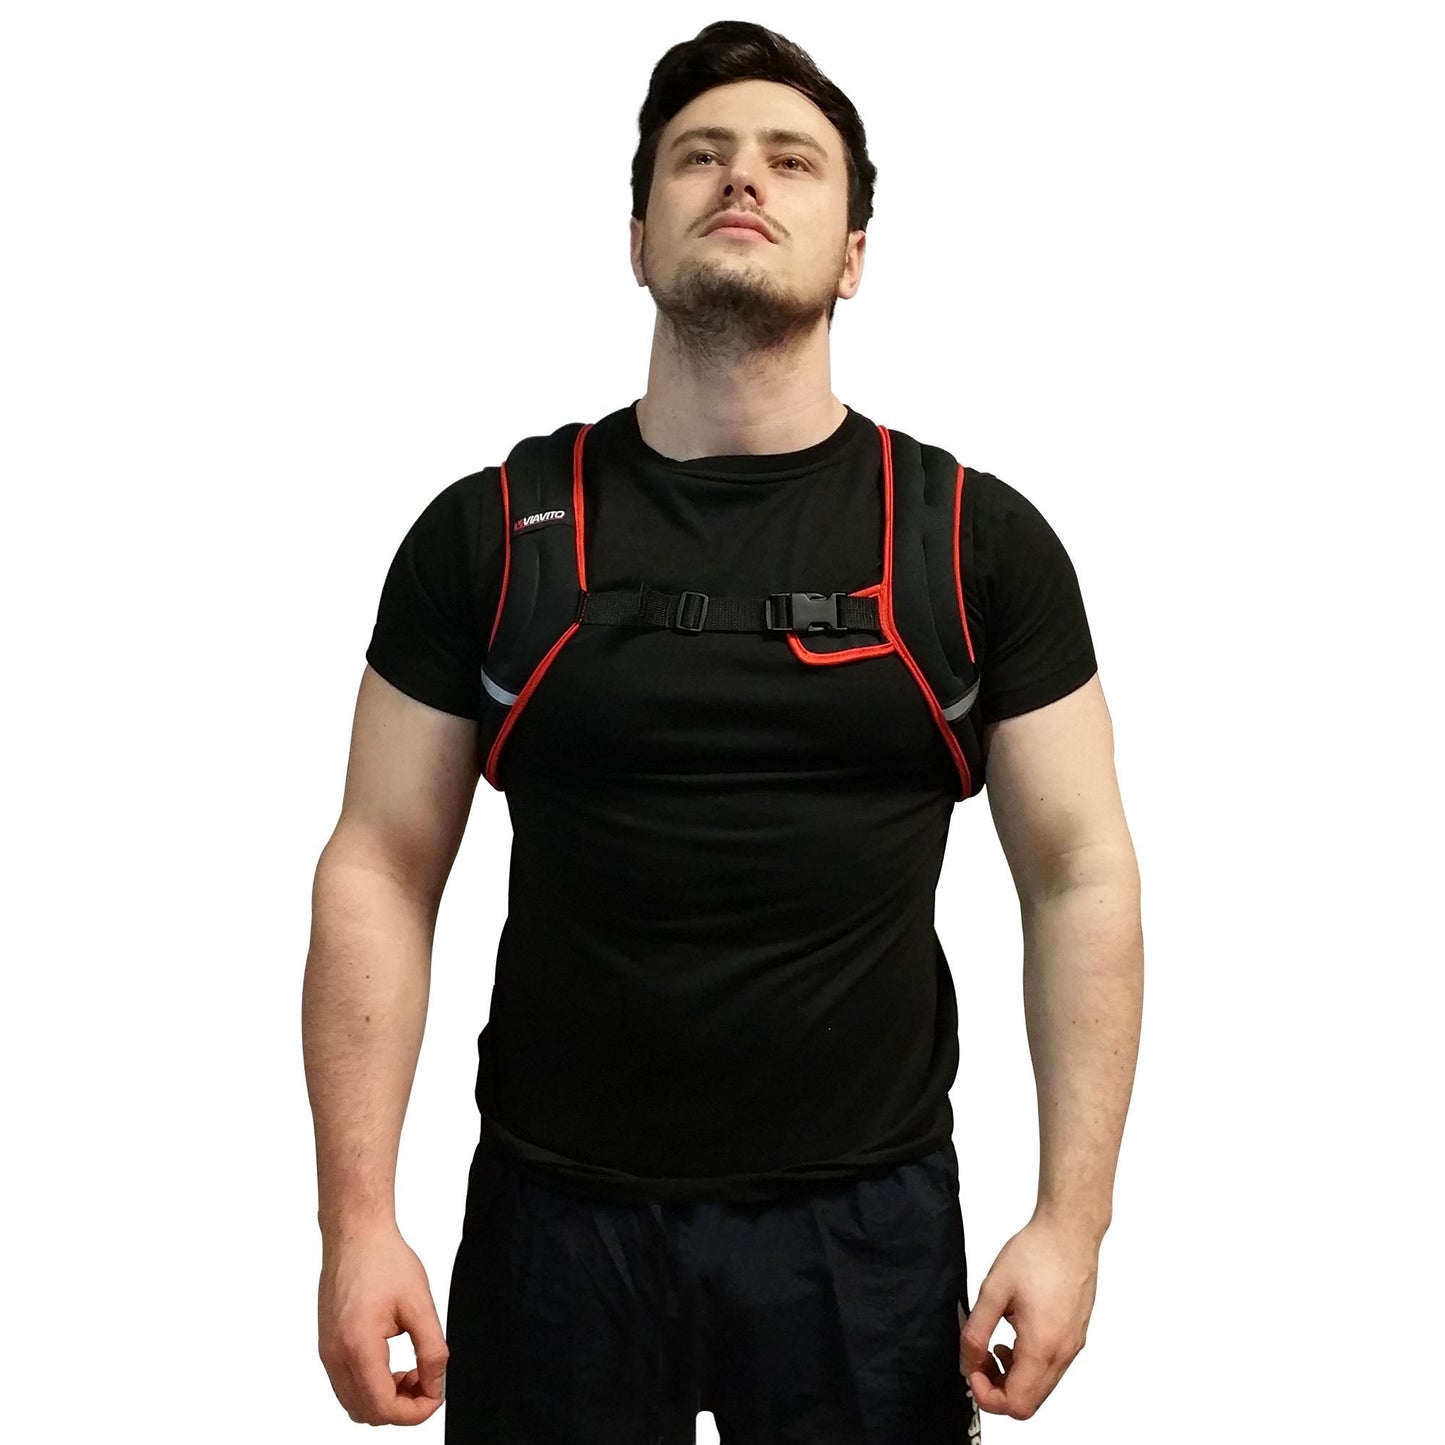 |Viavito 2.5kg Weighted Vest - Main|